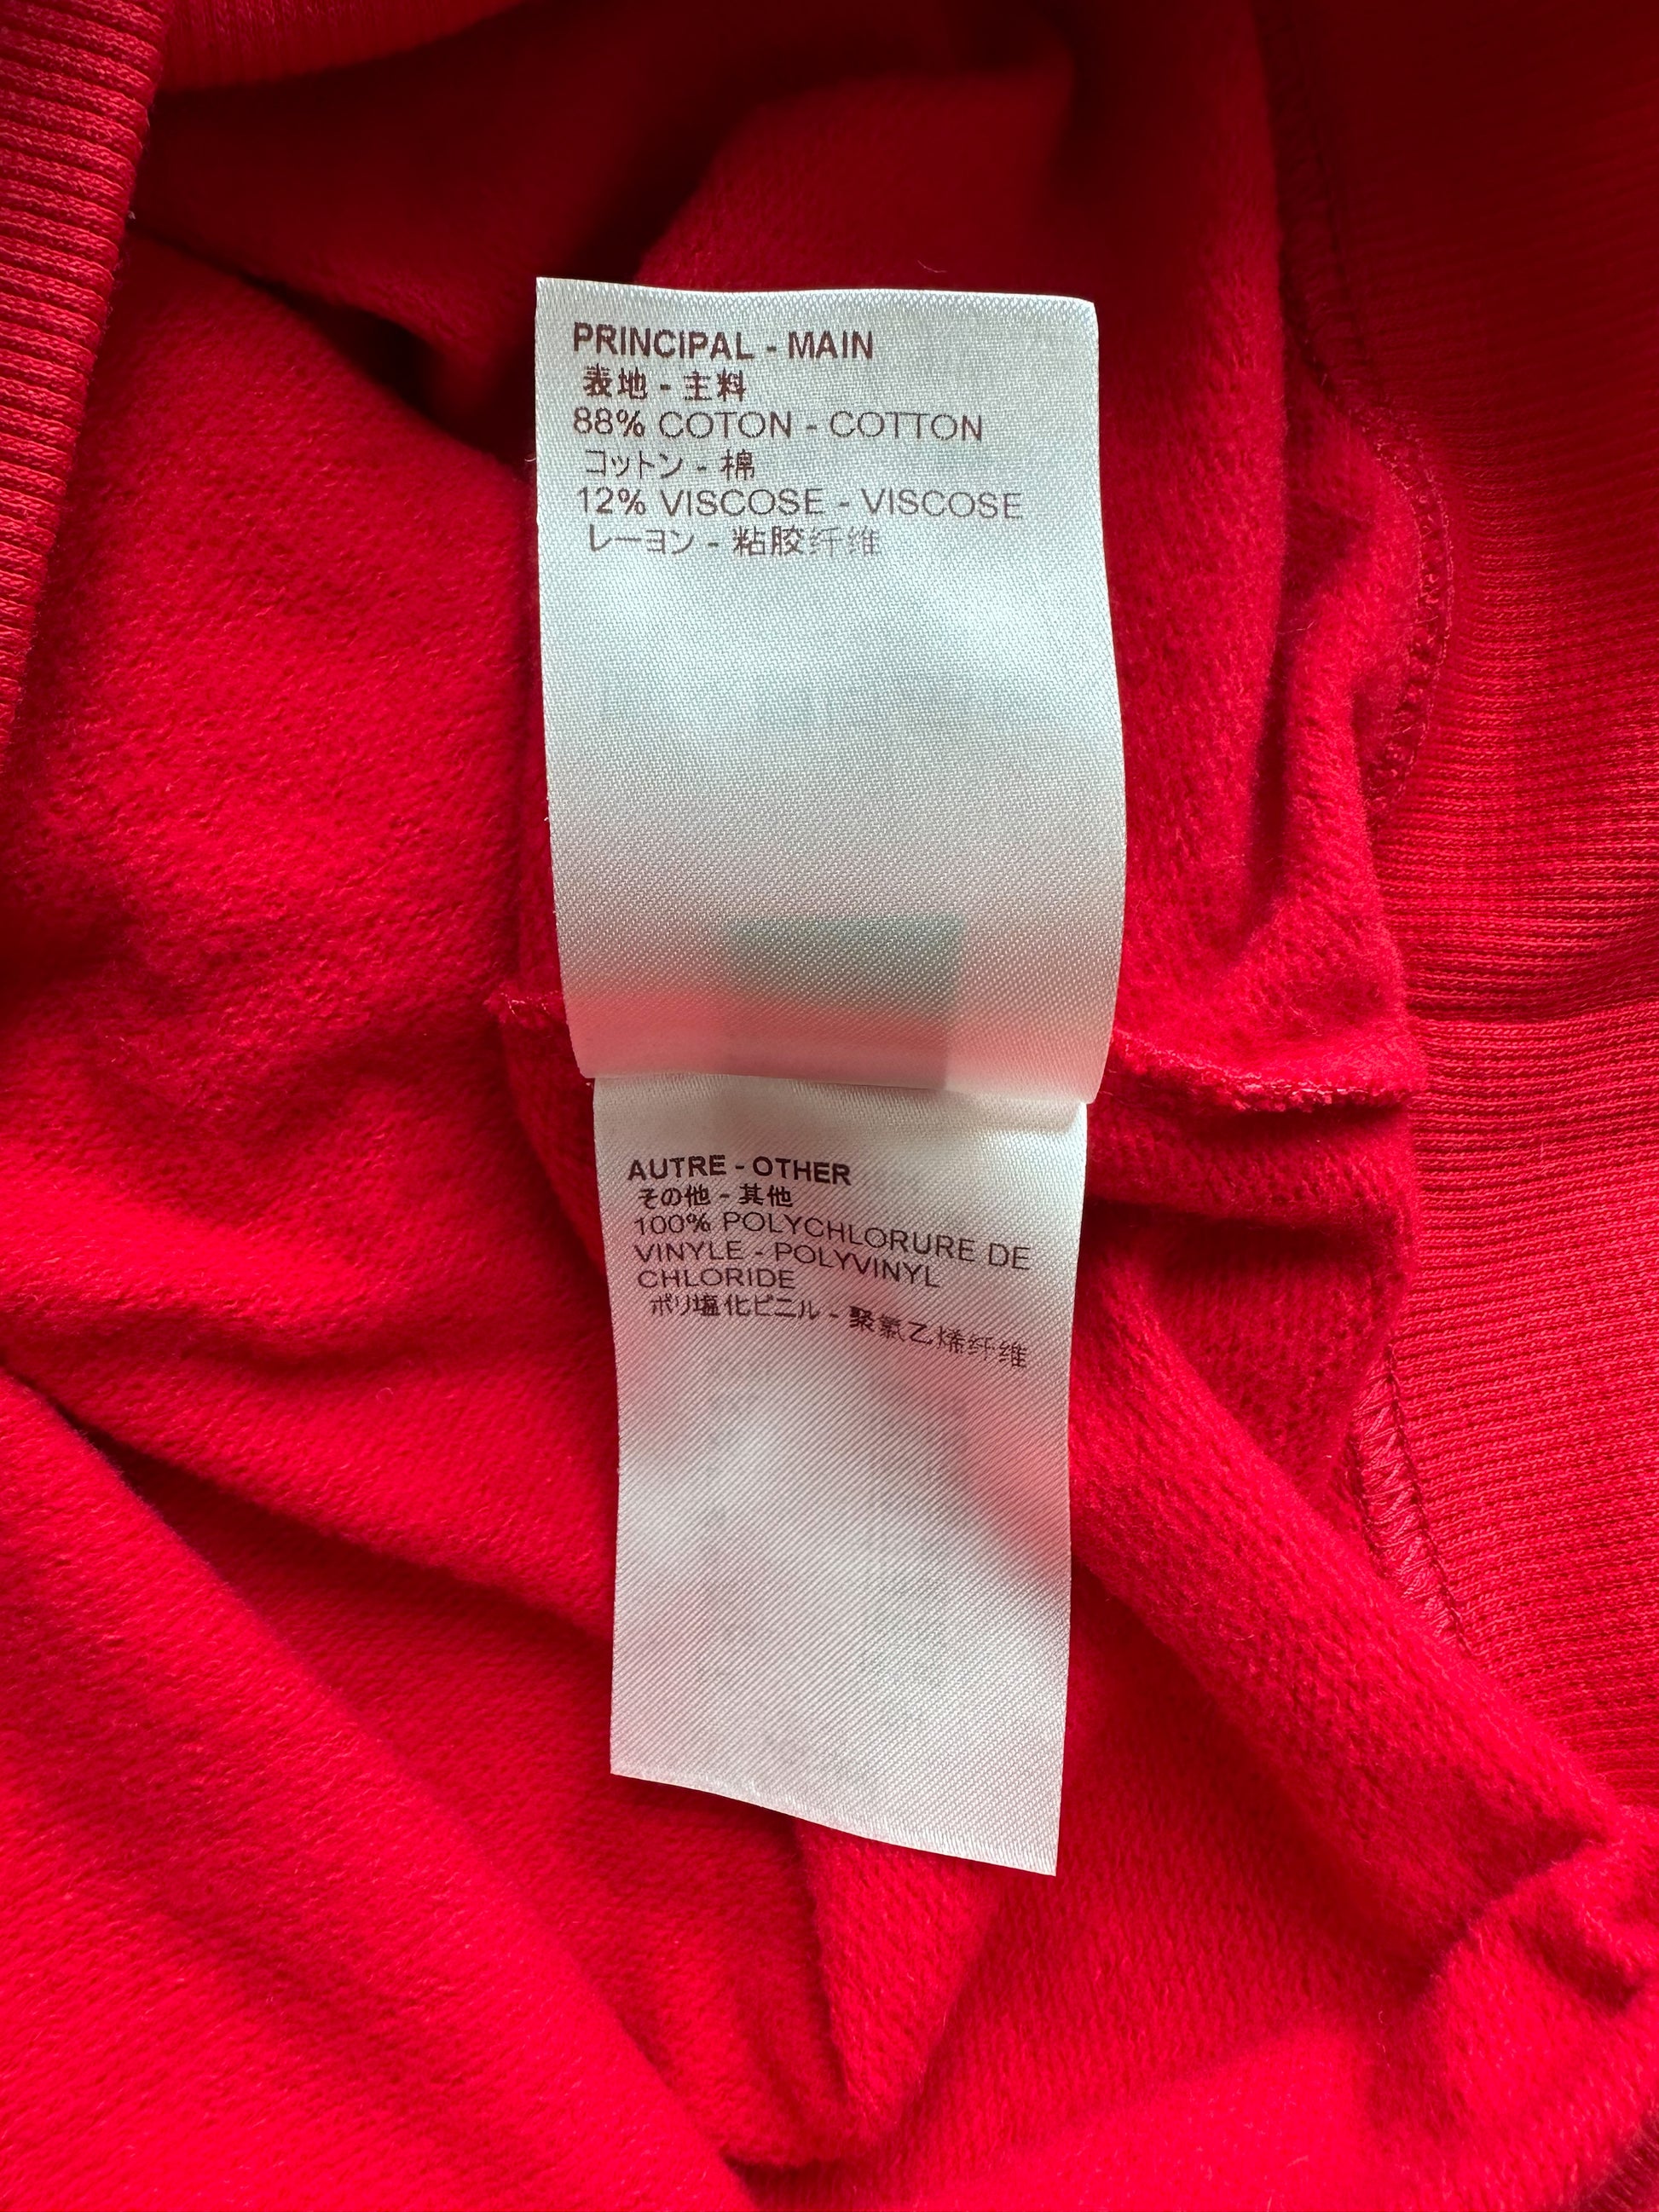 supreme hoodie red louis vuitton